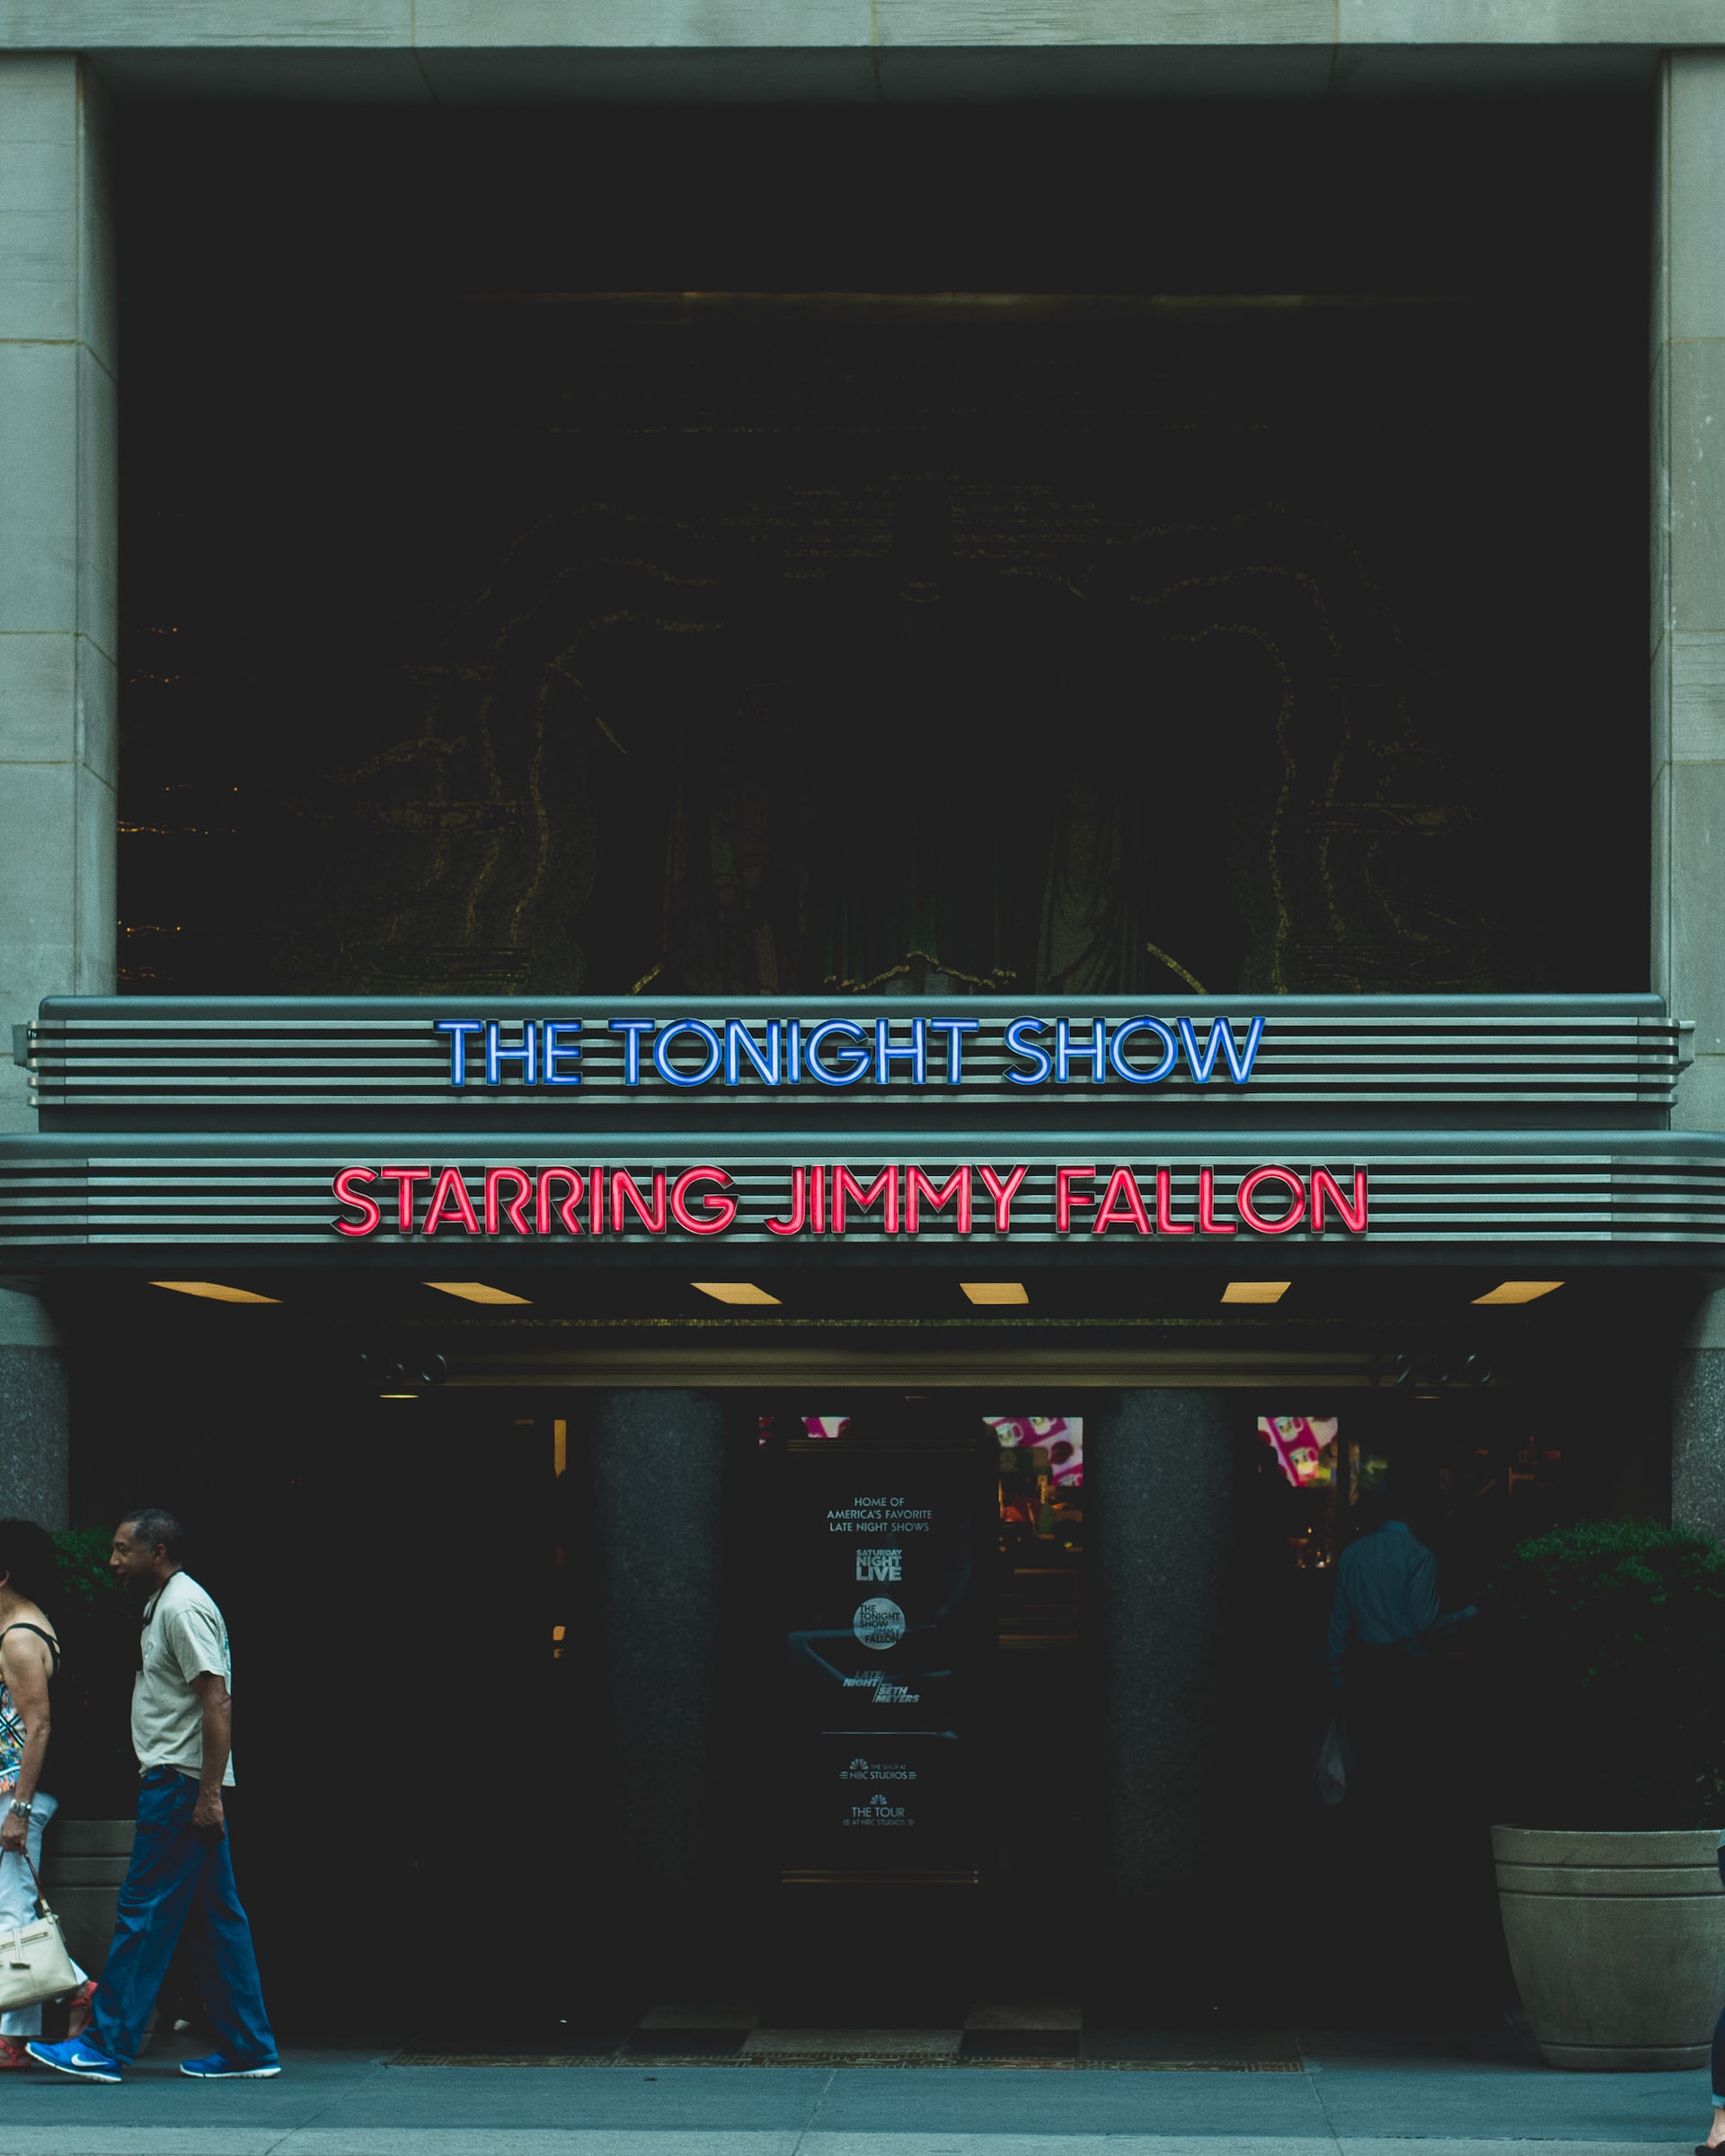 Jimmy fallon show in a theater